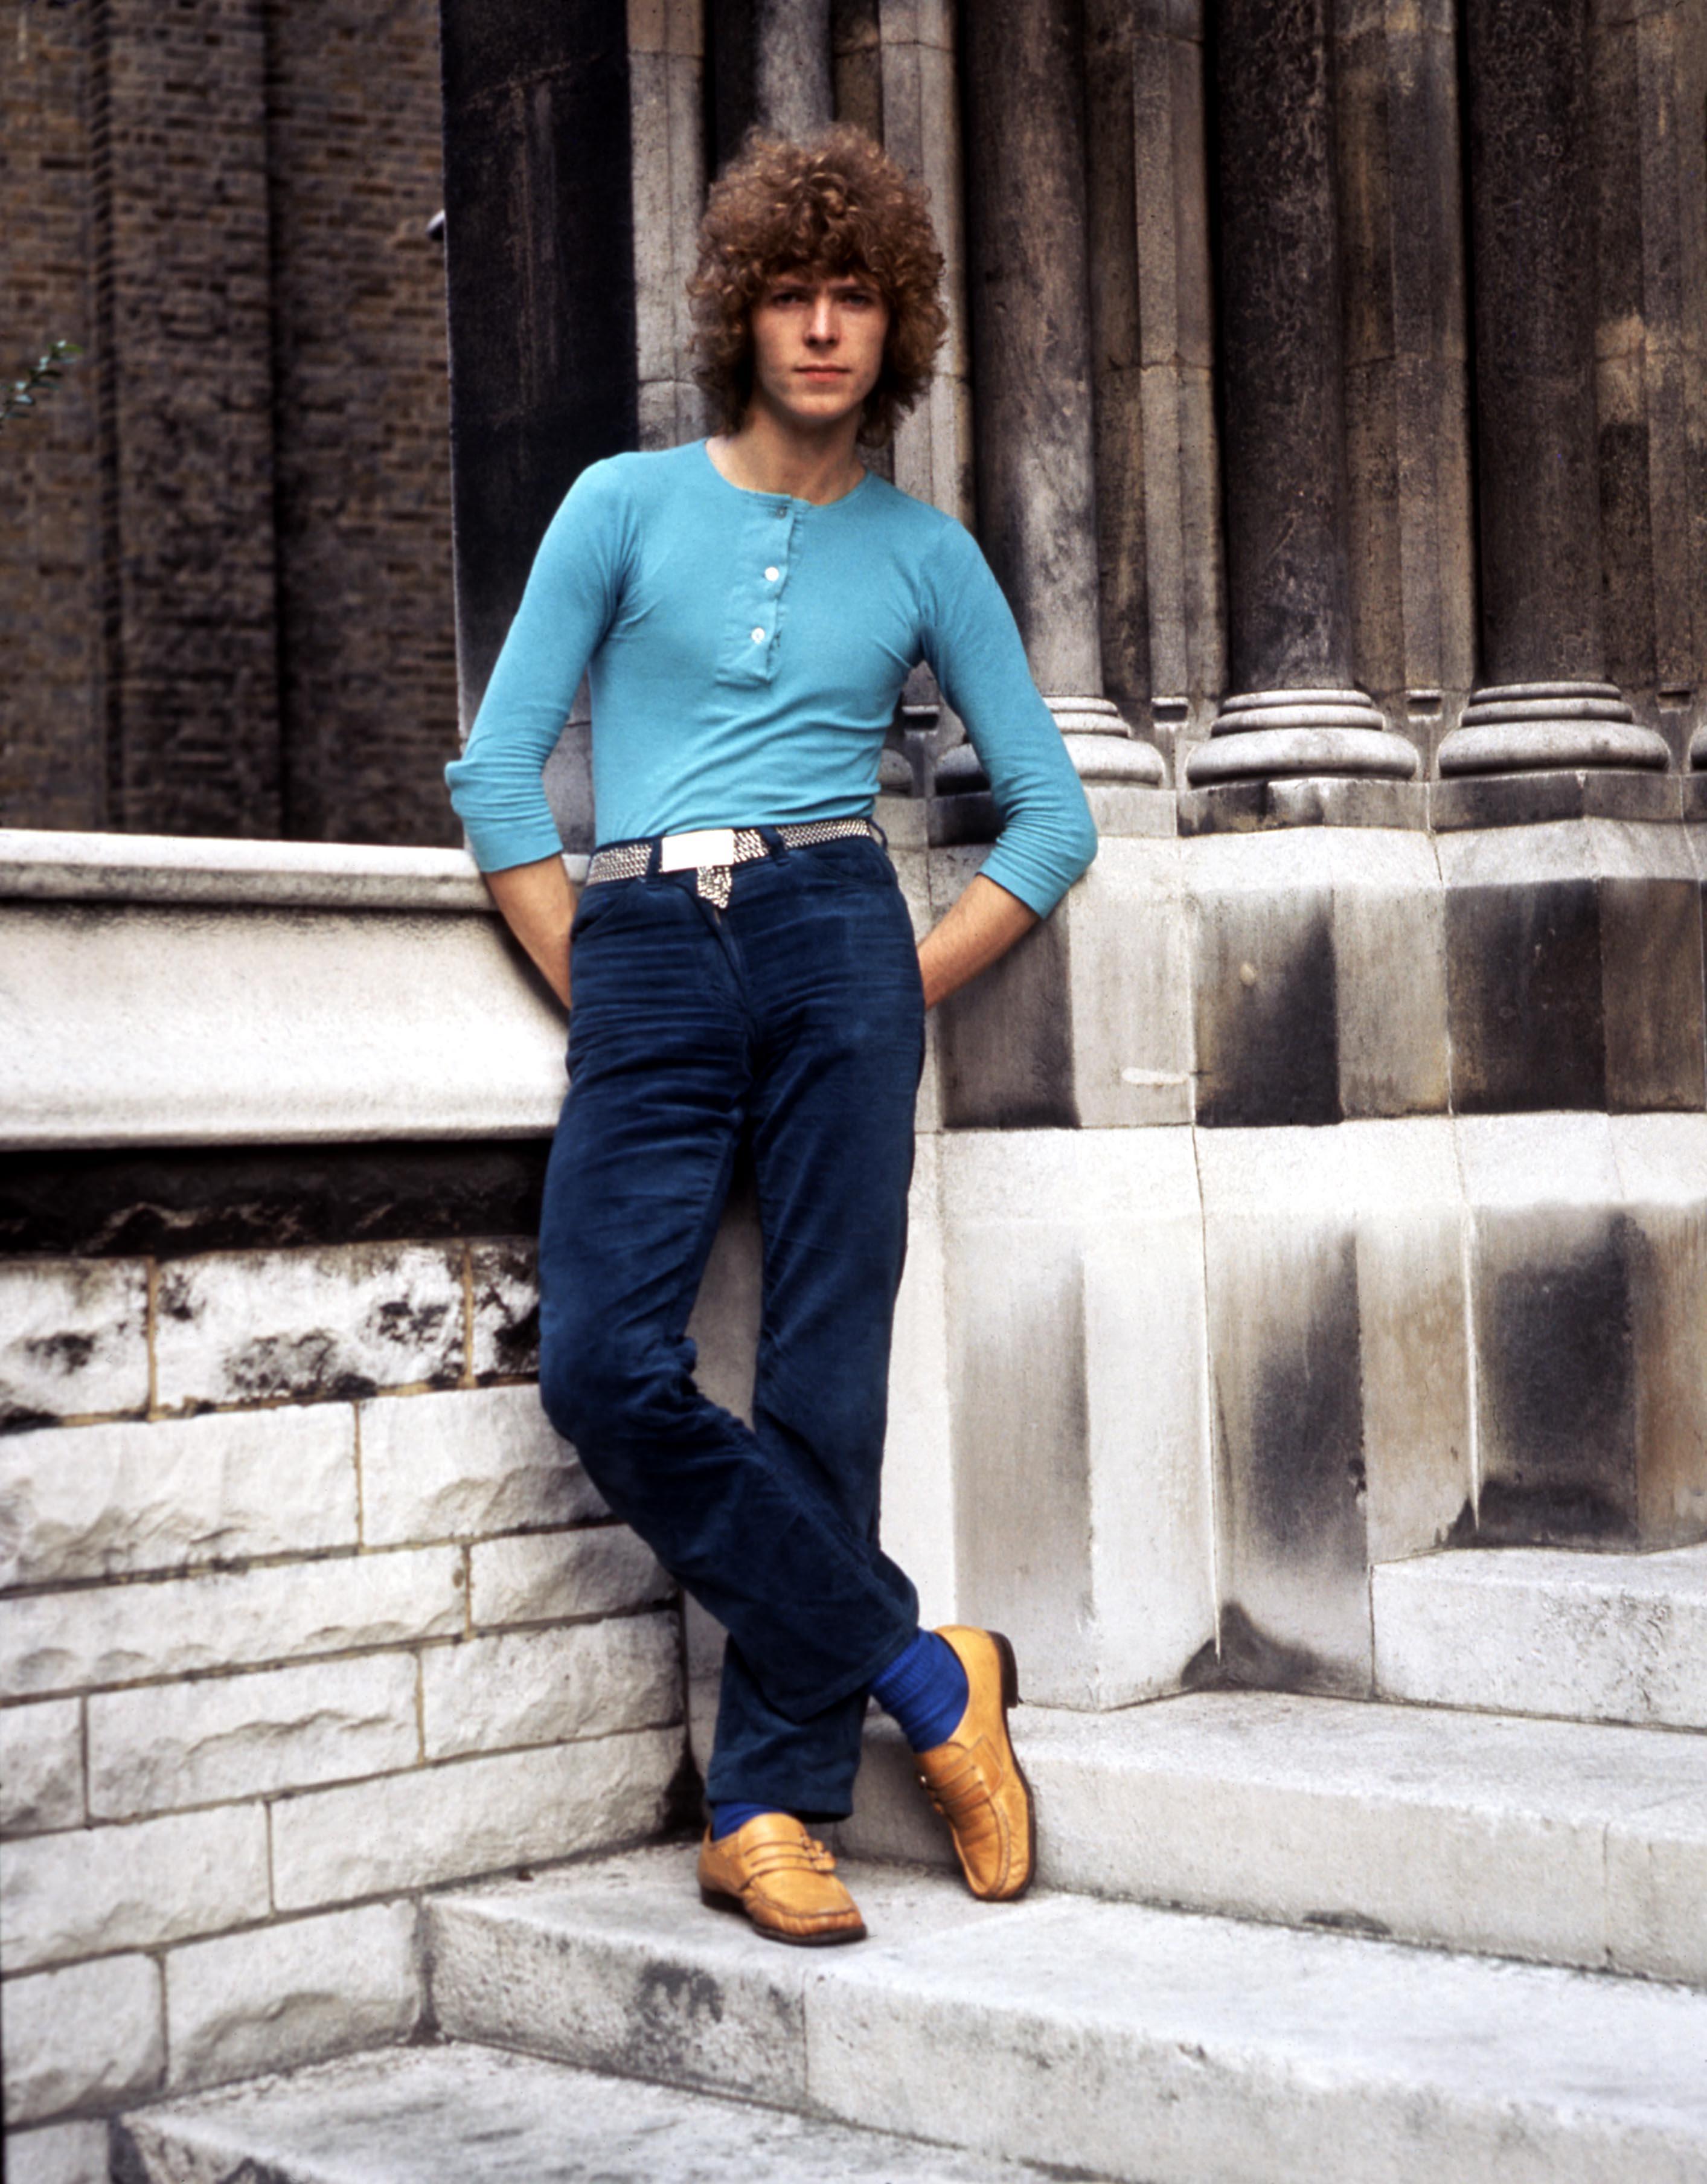 Unknown Portrait Photograph - Young David Bowie Posed on Steps Globe Photos Fine Art Print